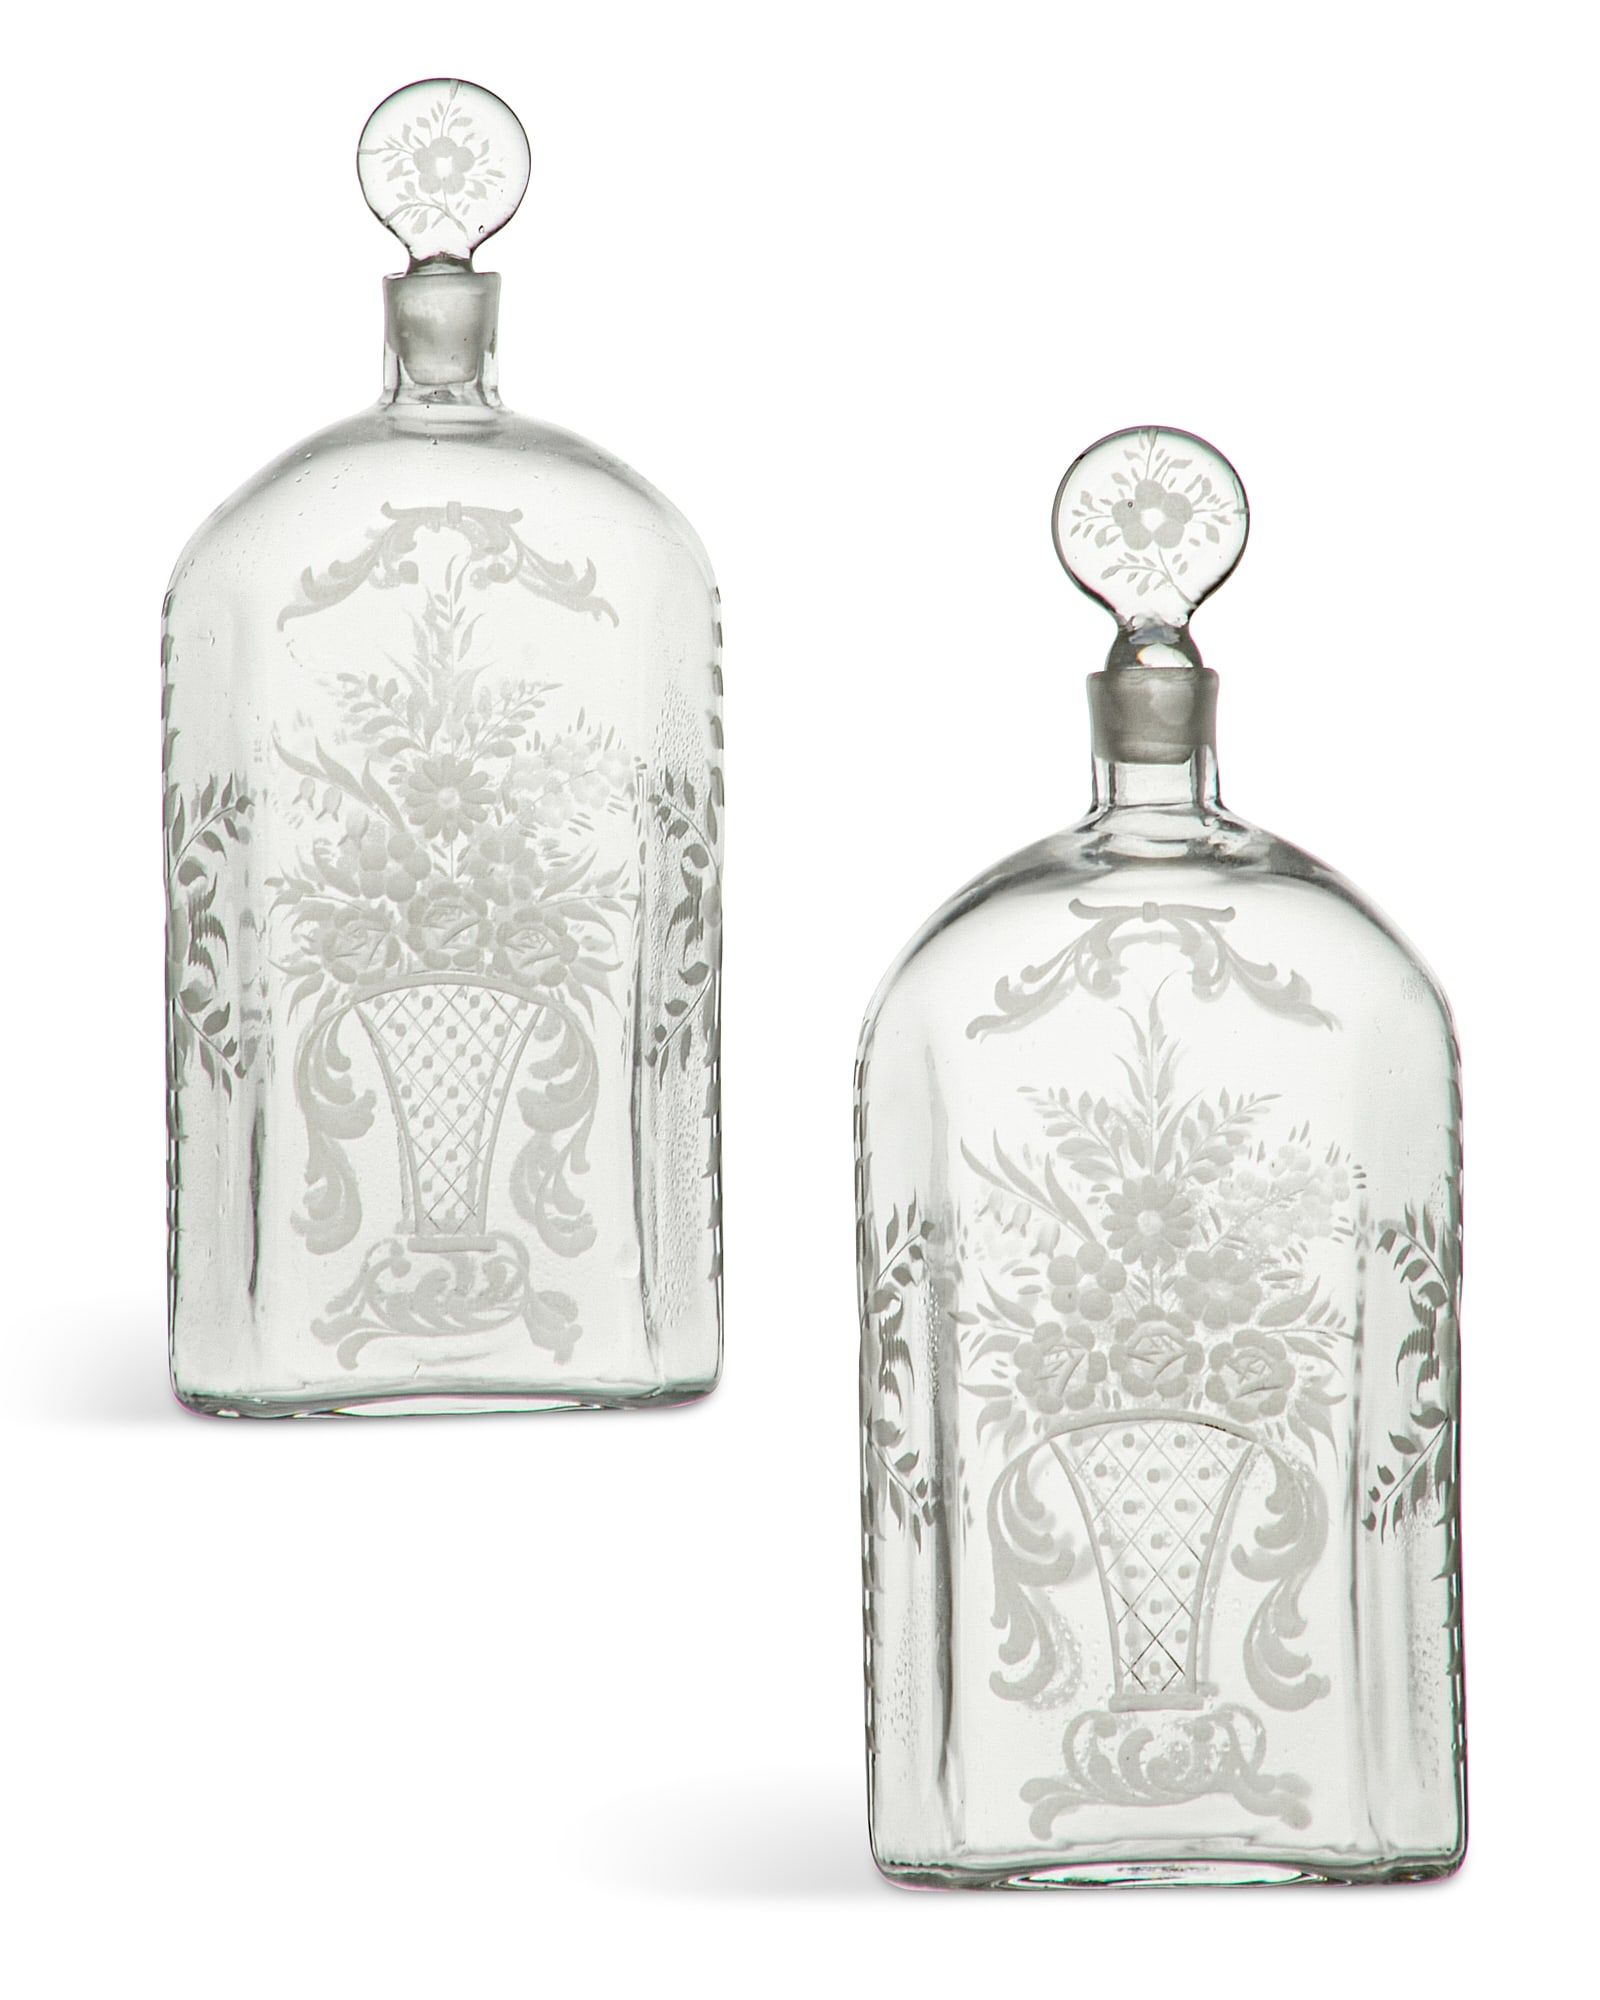 A PAIR OF CONTINENTAL DECANTERS